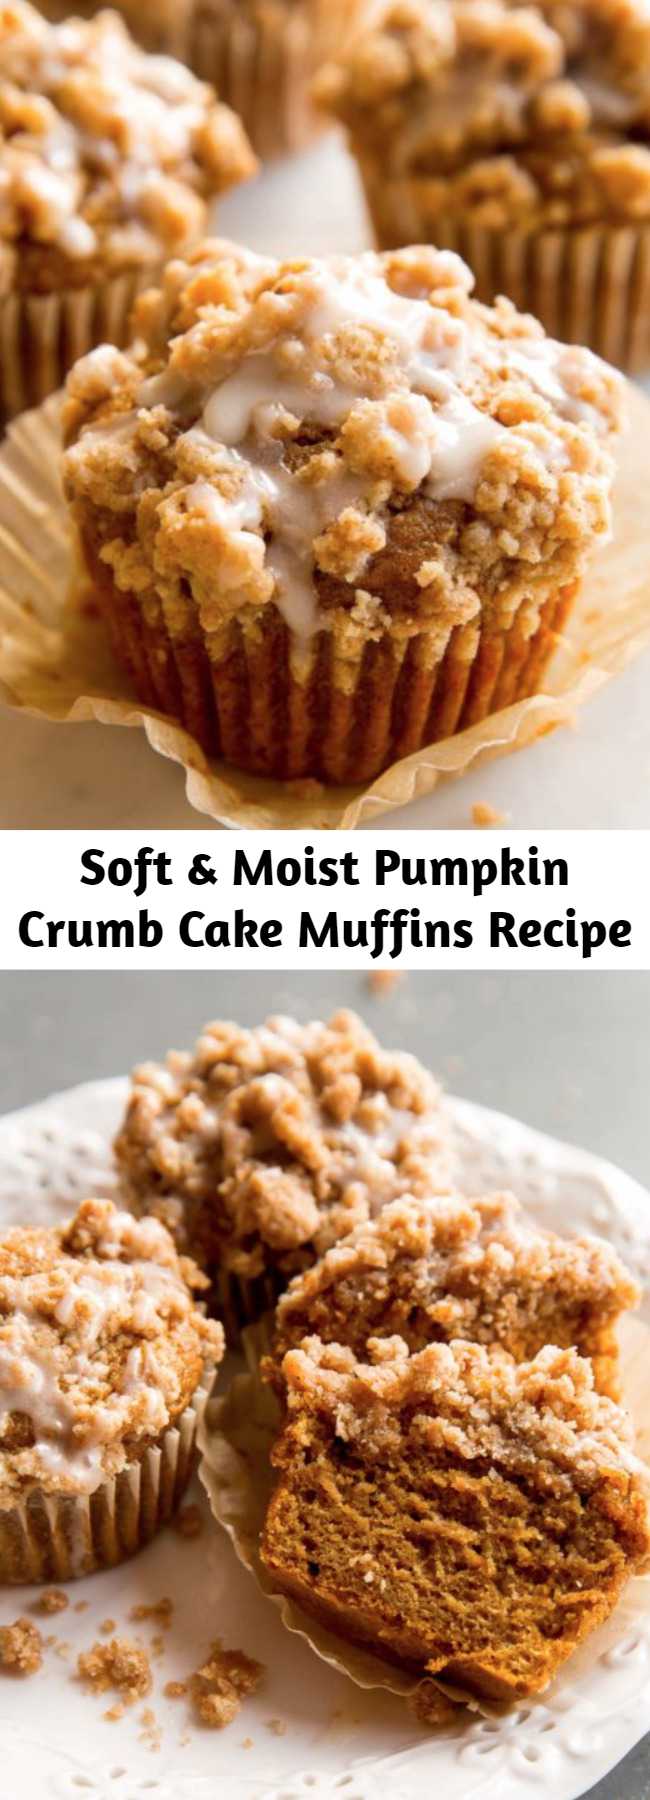 Soft & Moist Pumpkin Crumb Cake Muffins Recipe - These super soft pumpkin crumb cake muffins are topped with pumpkin spice crumbs and finished with sweet maple icing. They’re a reader favorite and after baking one batch, you’ll understand why!